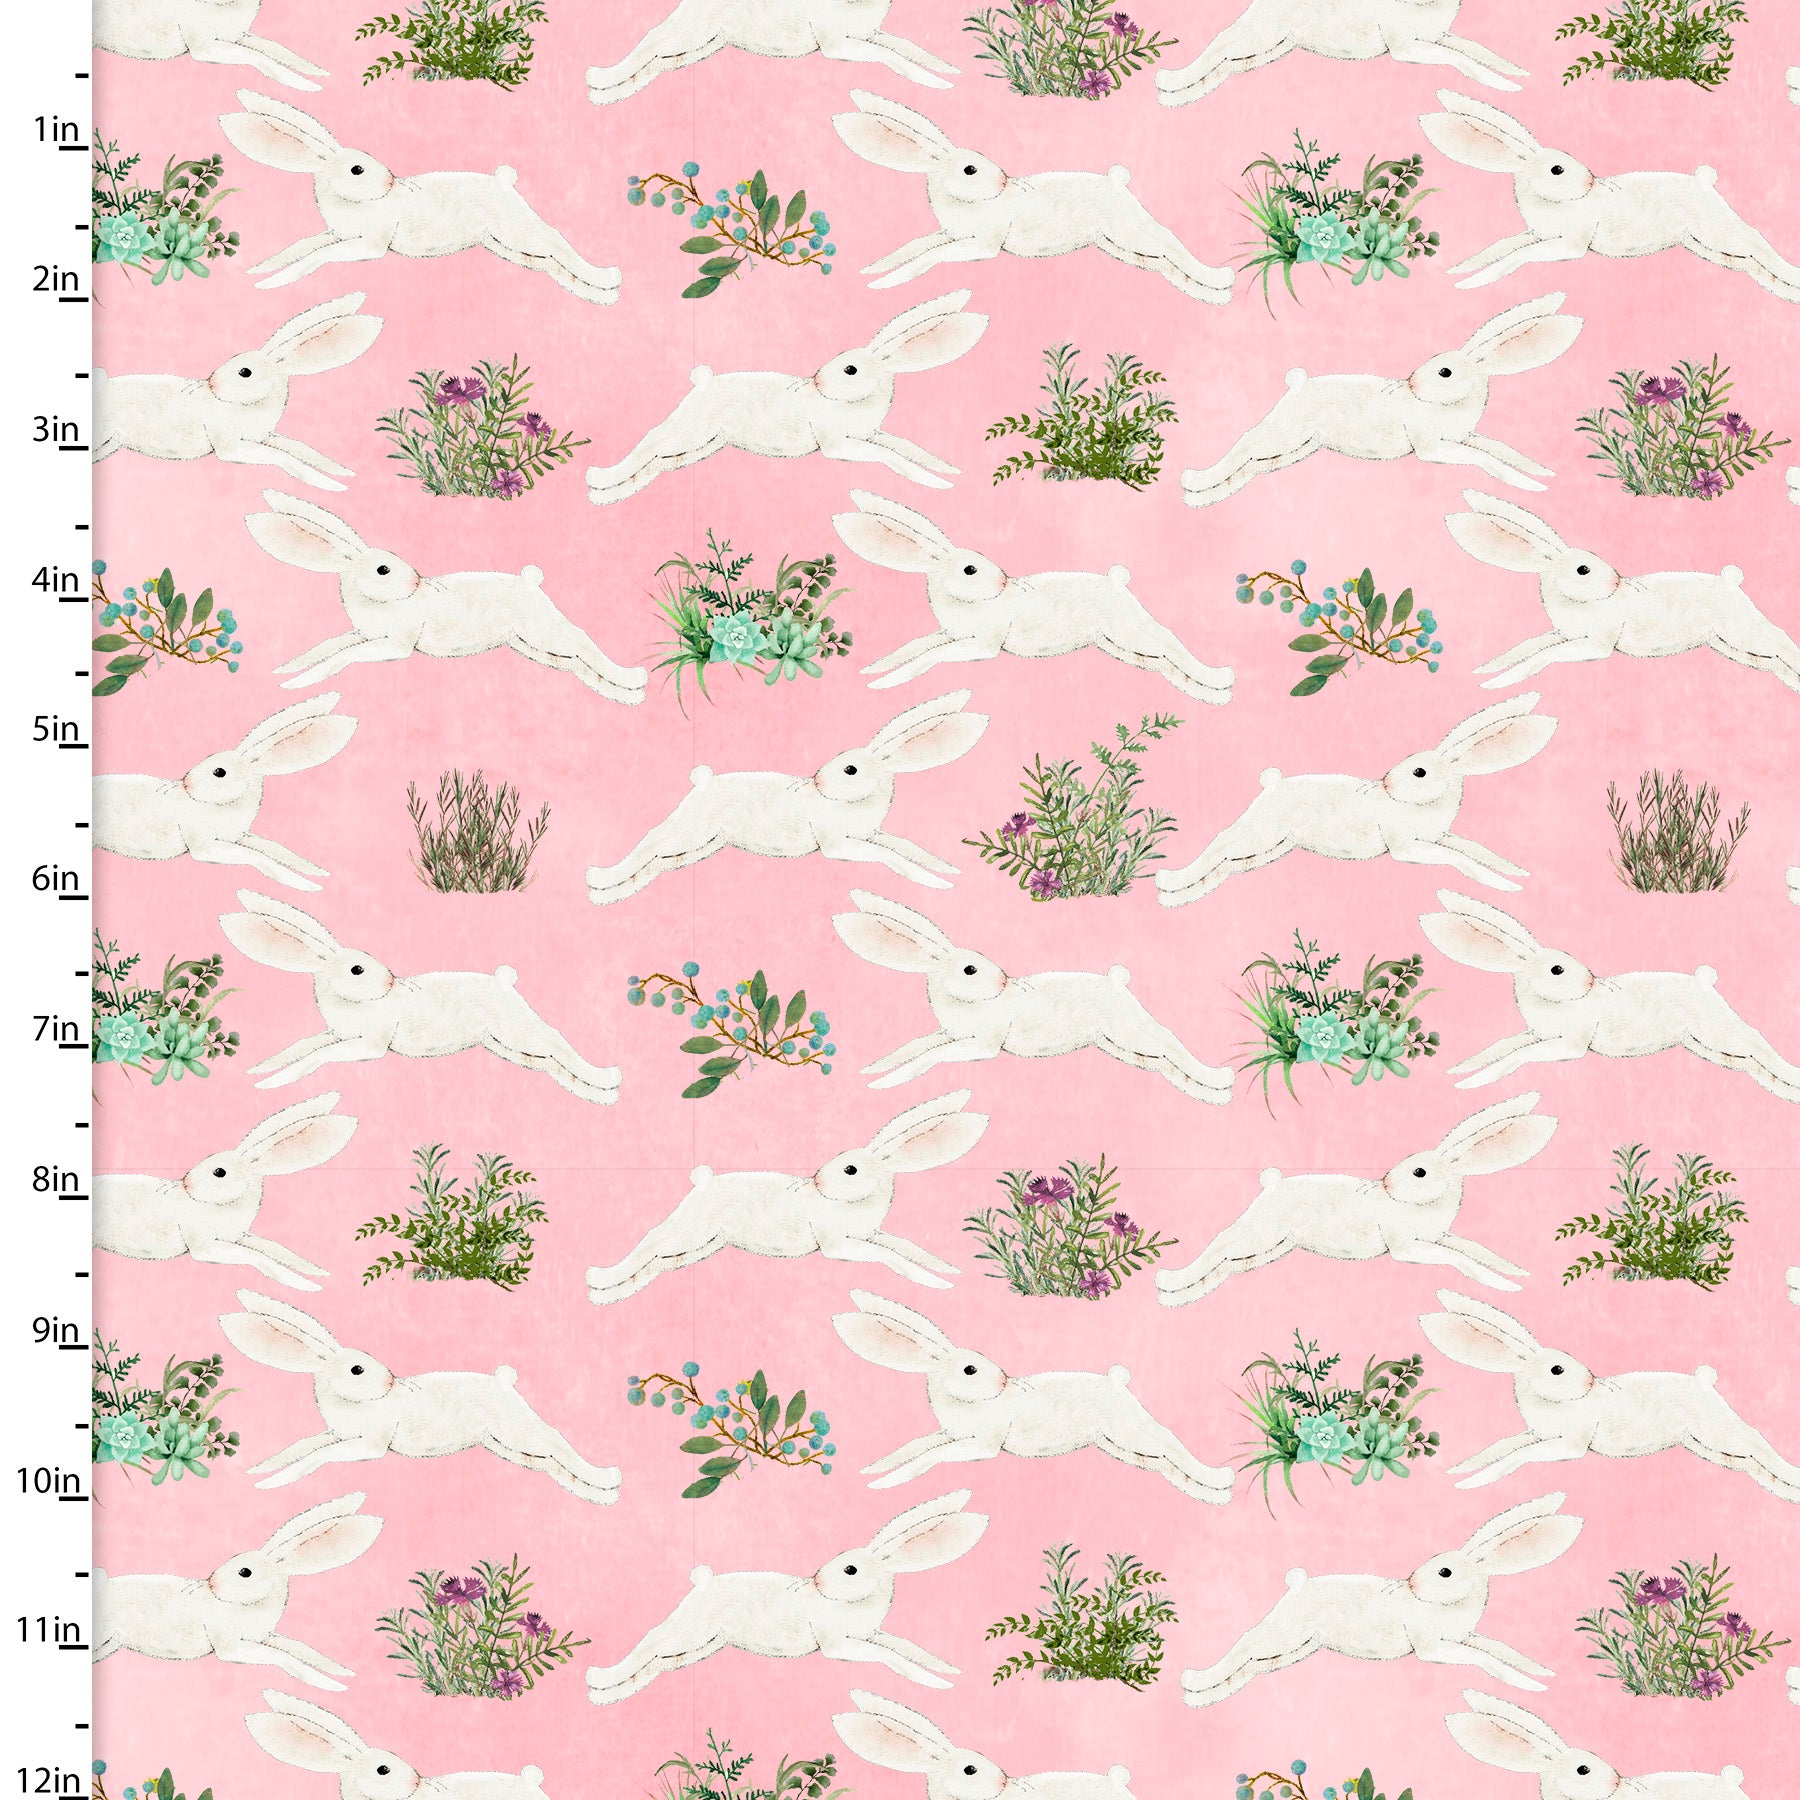 white hares on a pink cotton fabric - touch of Spring by 3 Wishes